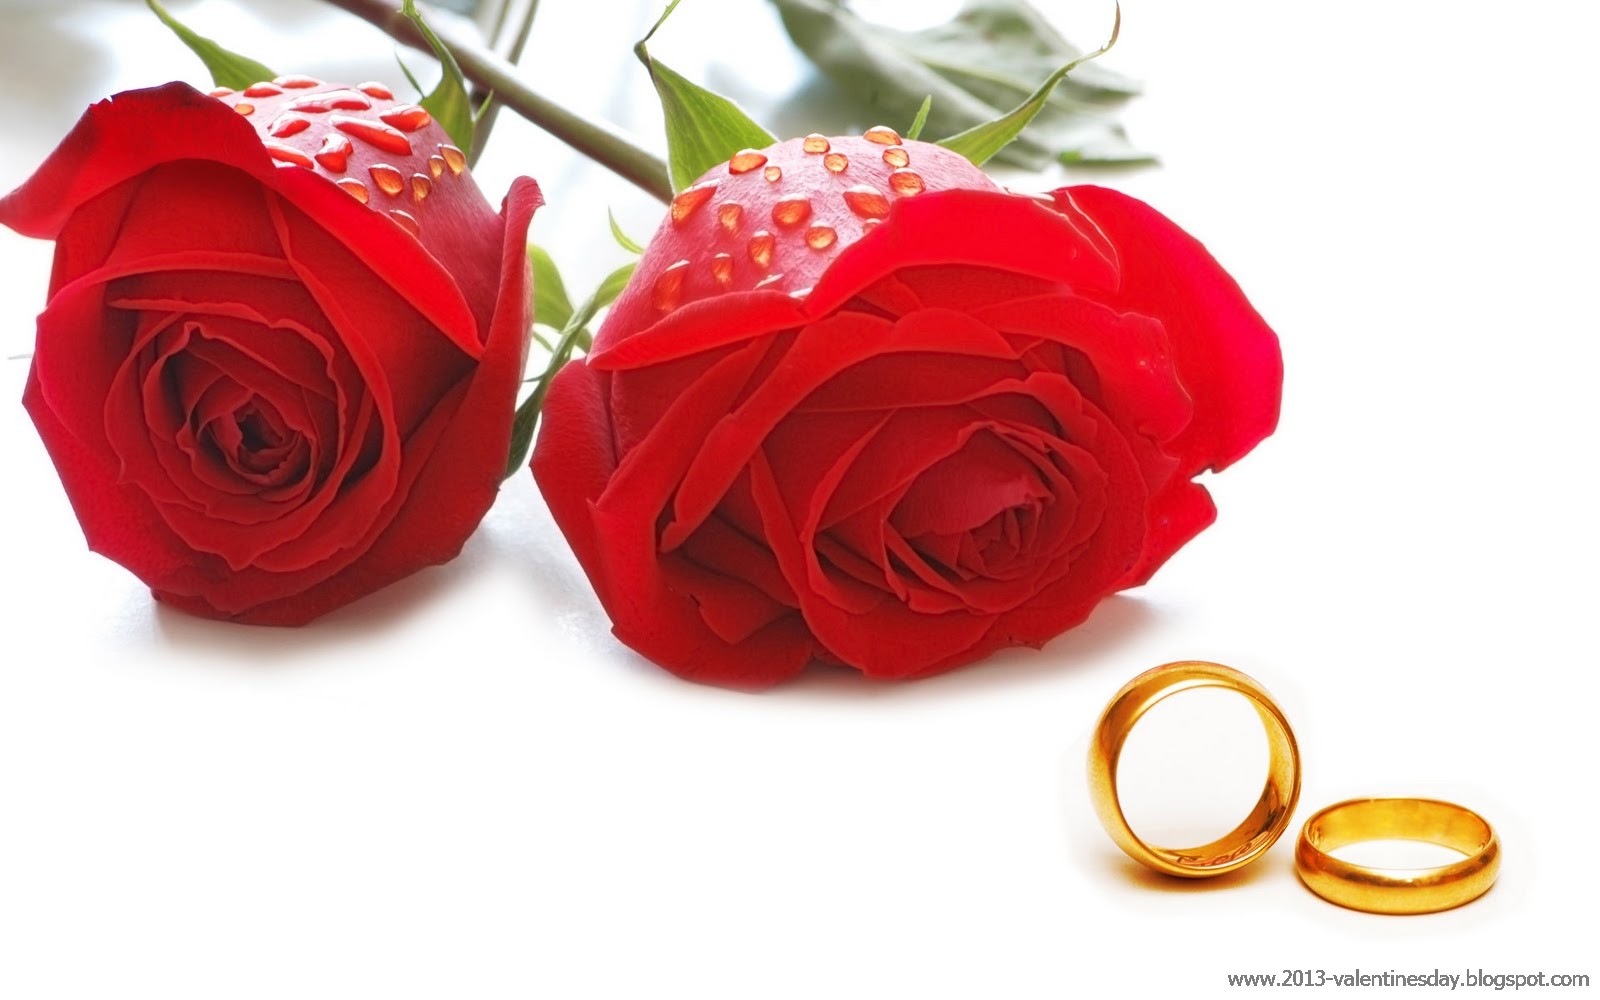 17. New Latest Happy Rose Day 2014 Hd Wallpapers